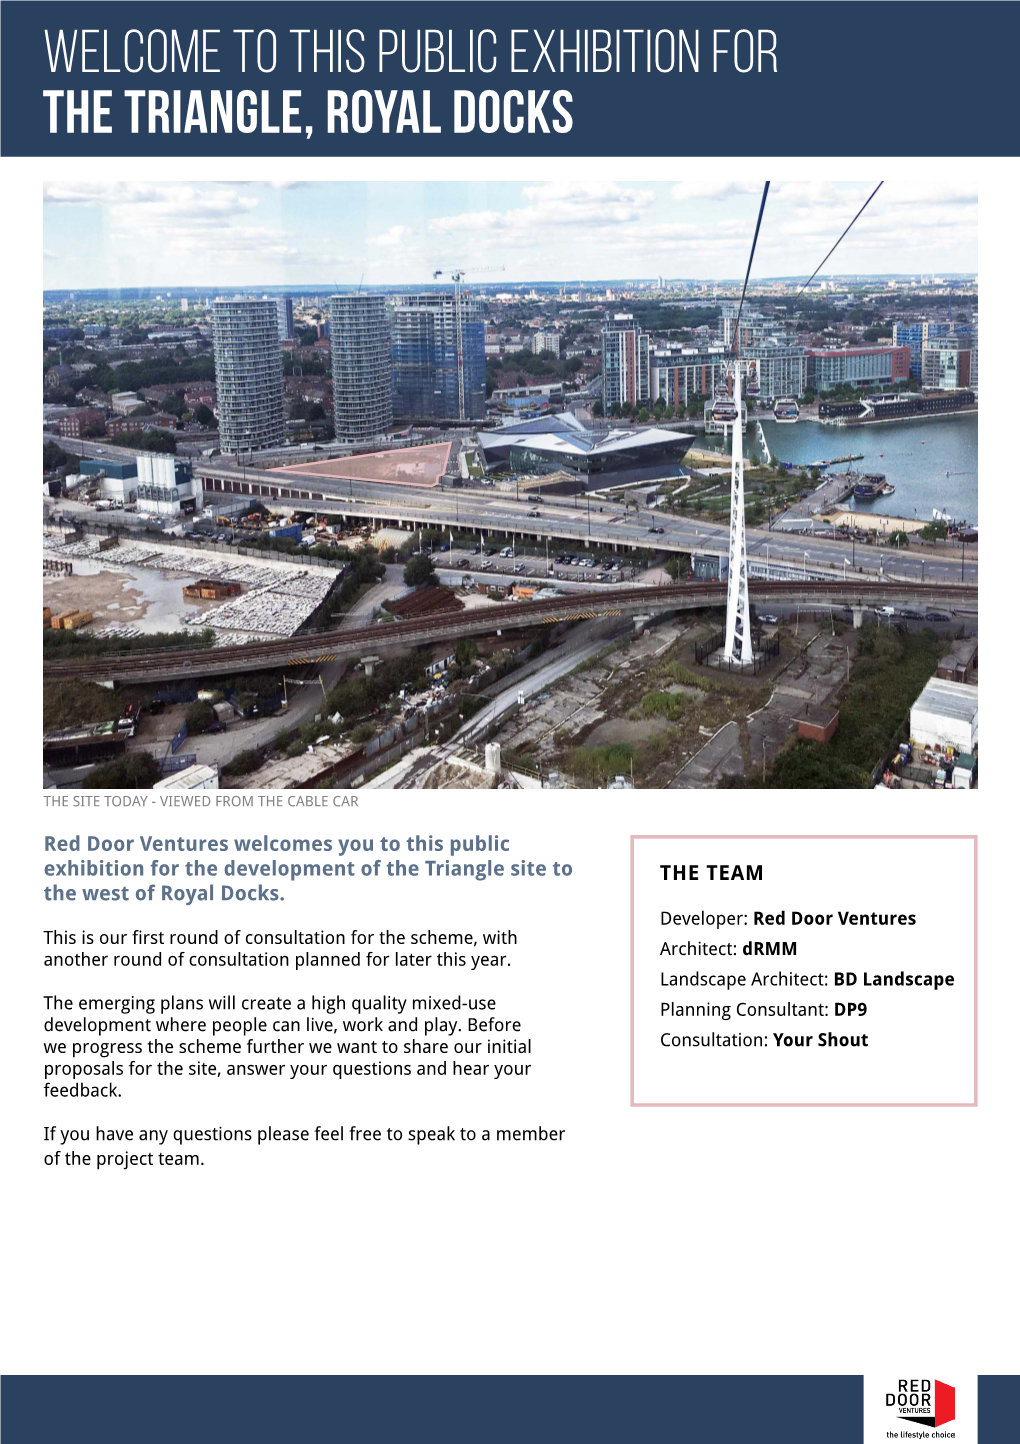 Red Door Ventures Welcomes You to This Public Exhibition for the Development of the Triangle Site to the Team the West of Royal Docks